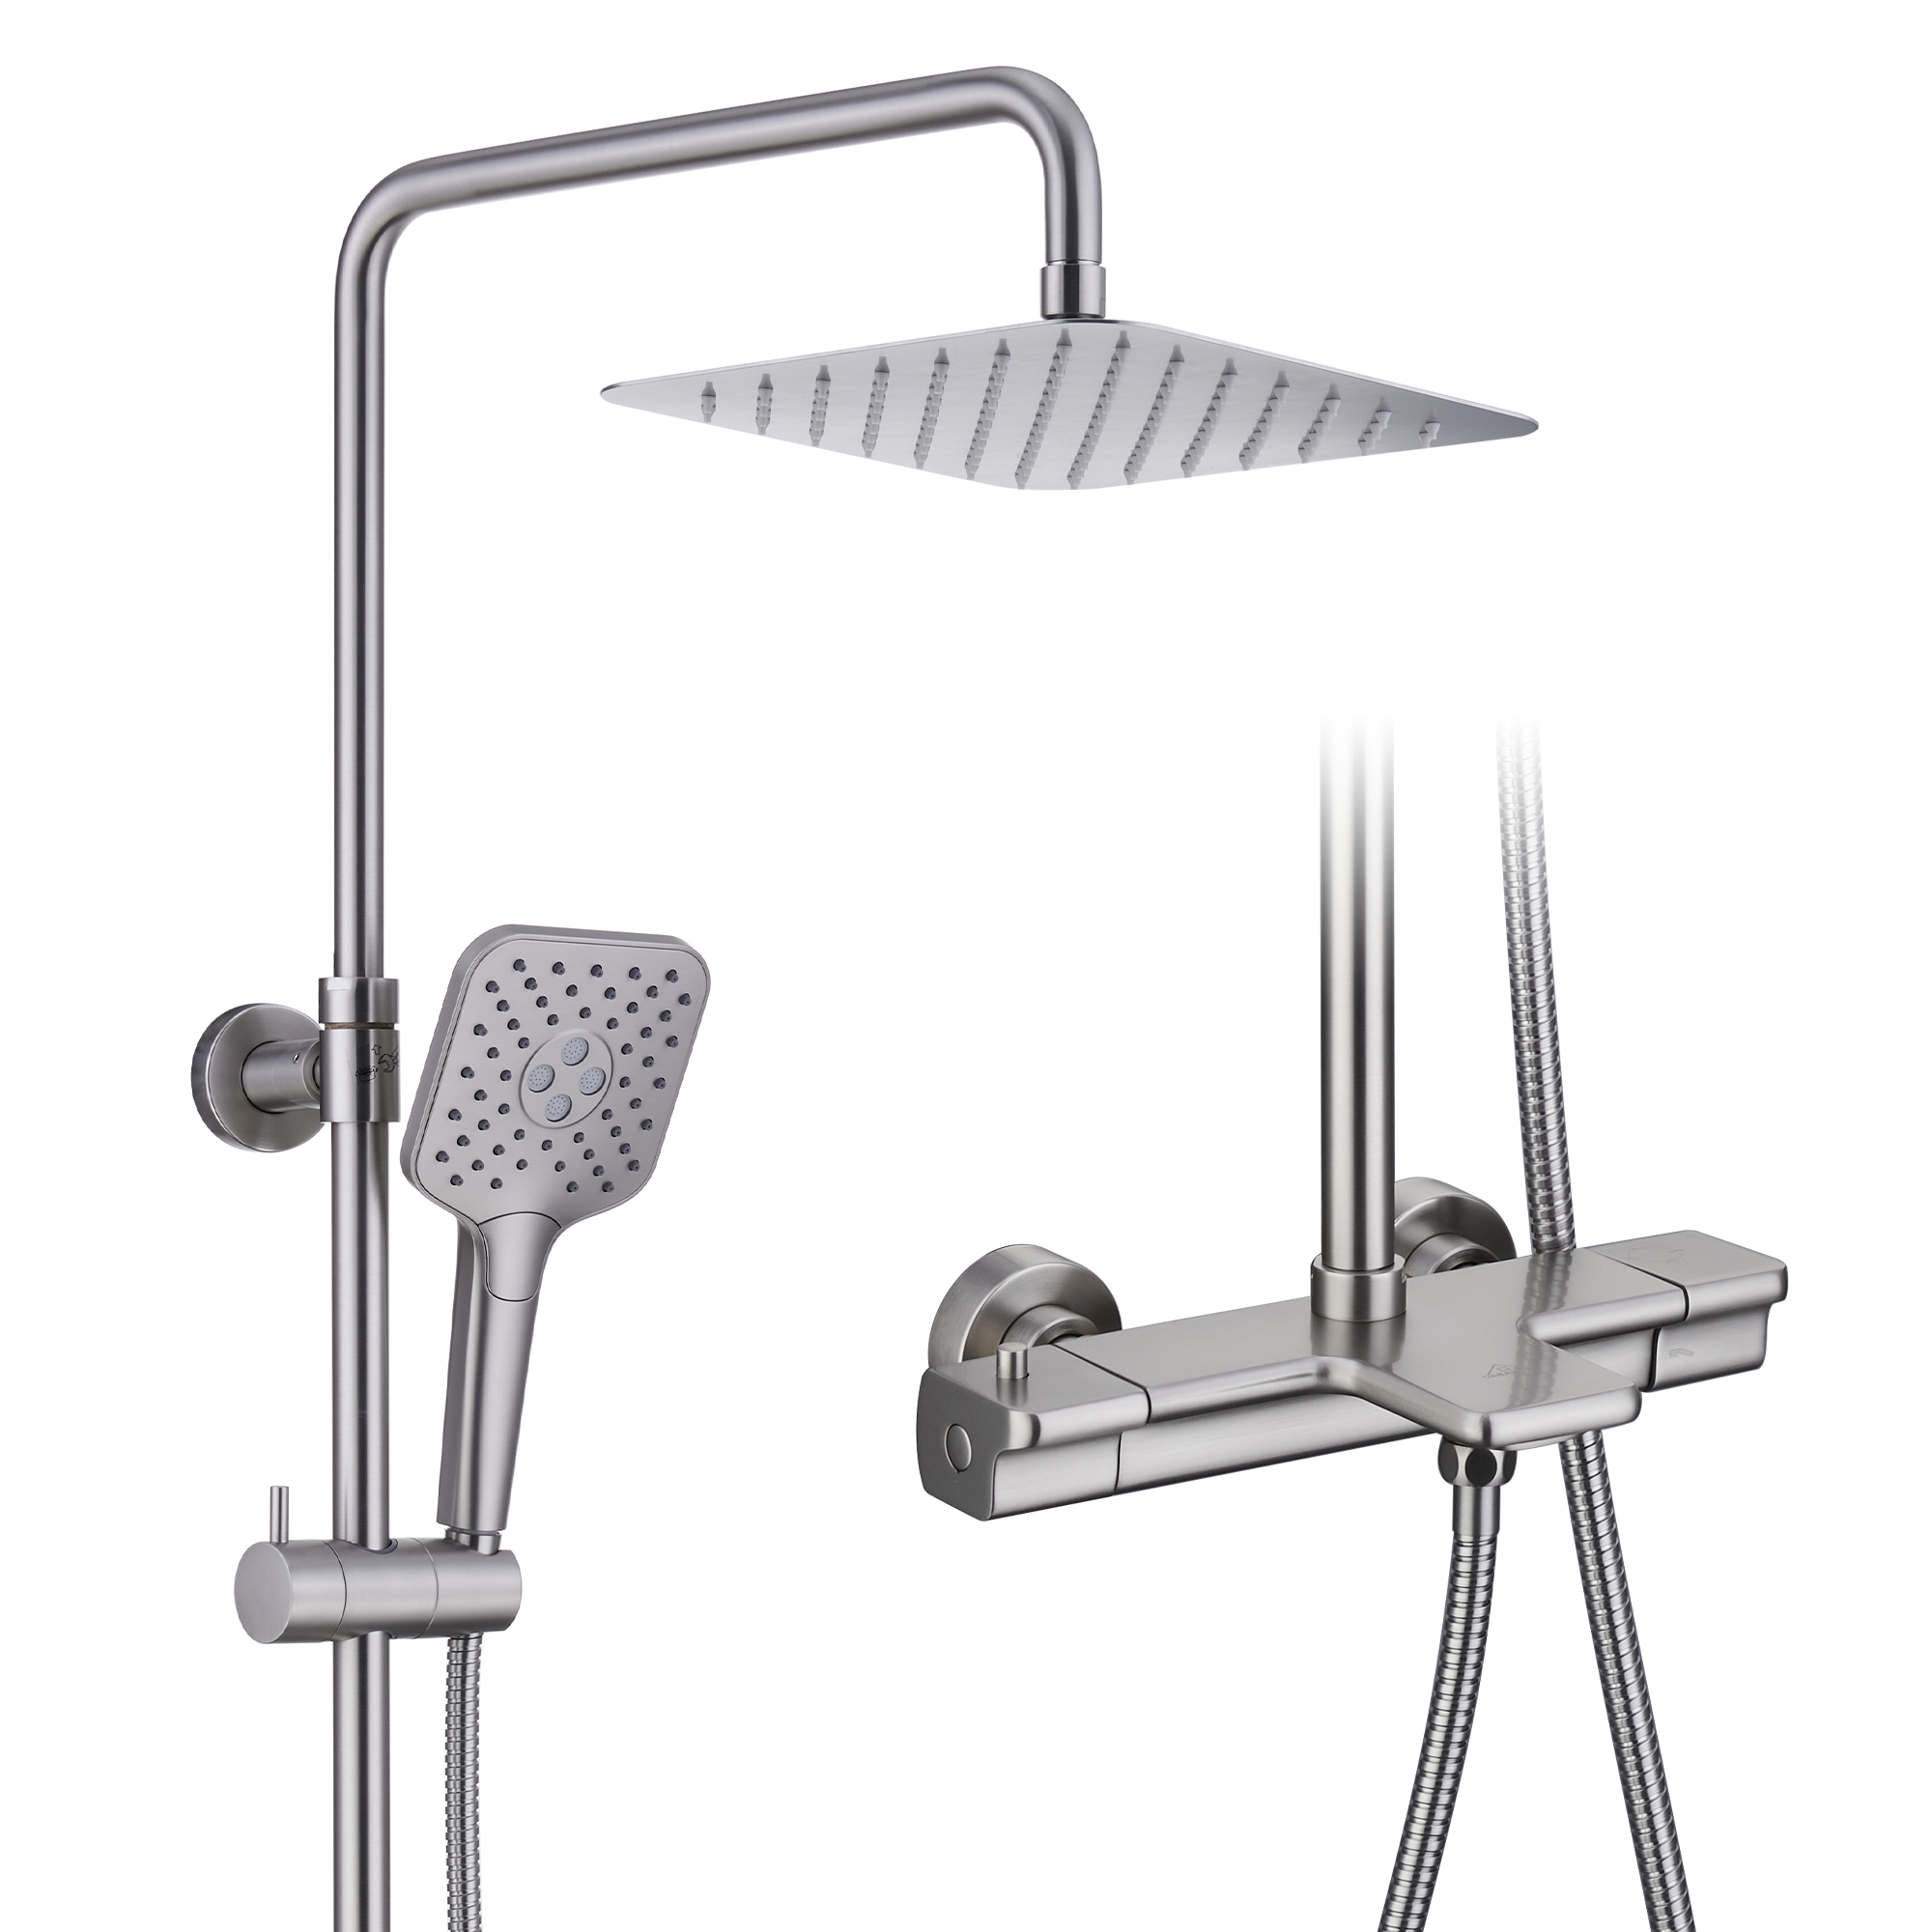 9.8" Thermostatic Rain Shower Faucet with Tub Spout in Brushed Nickel